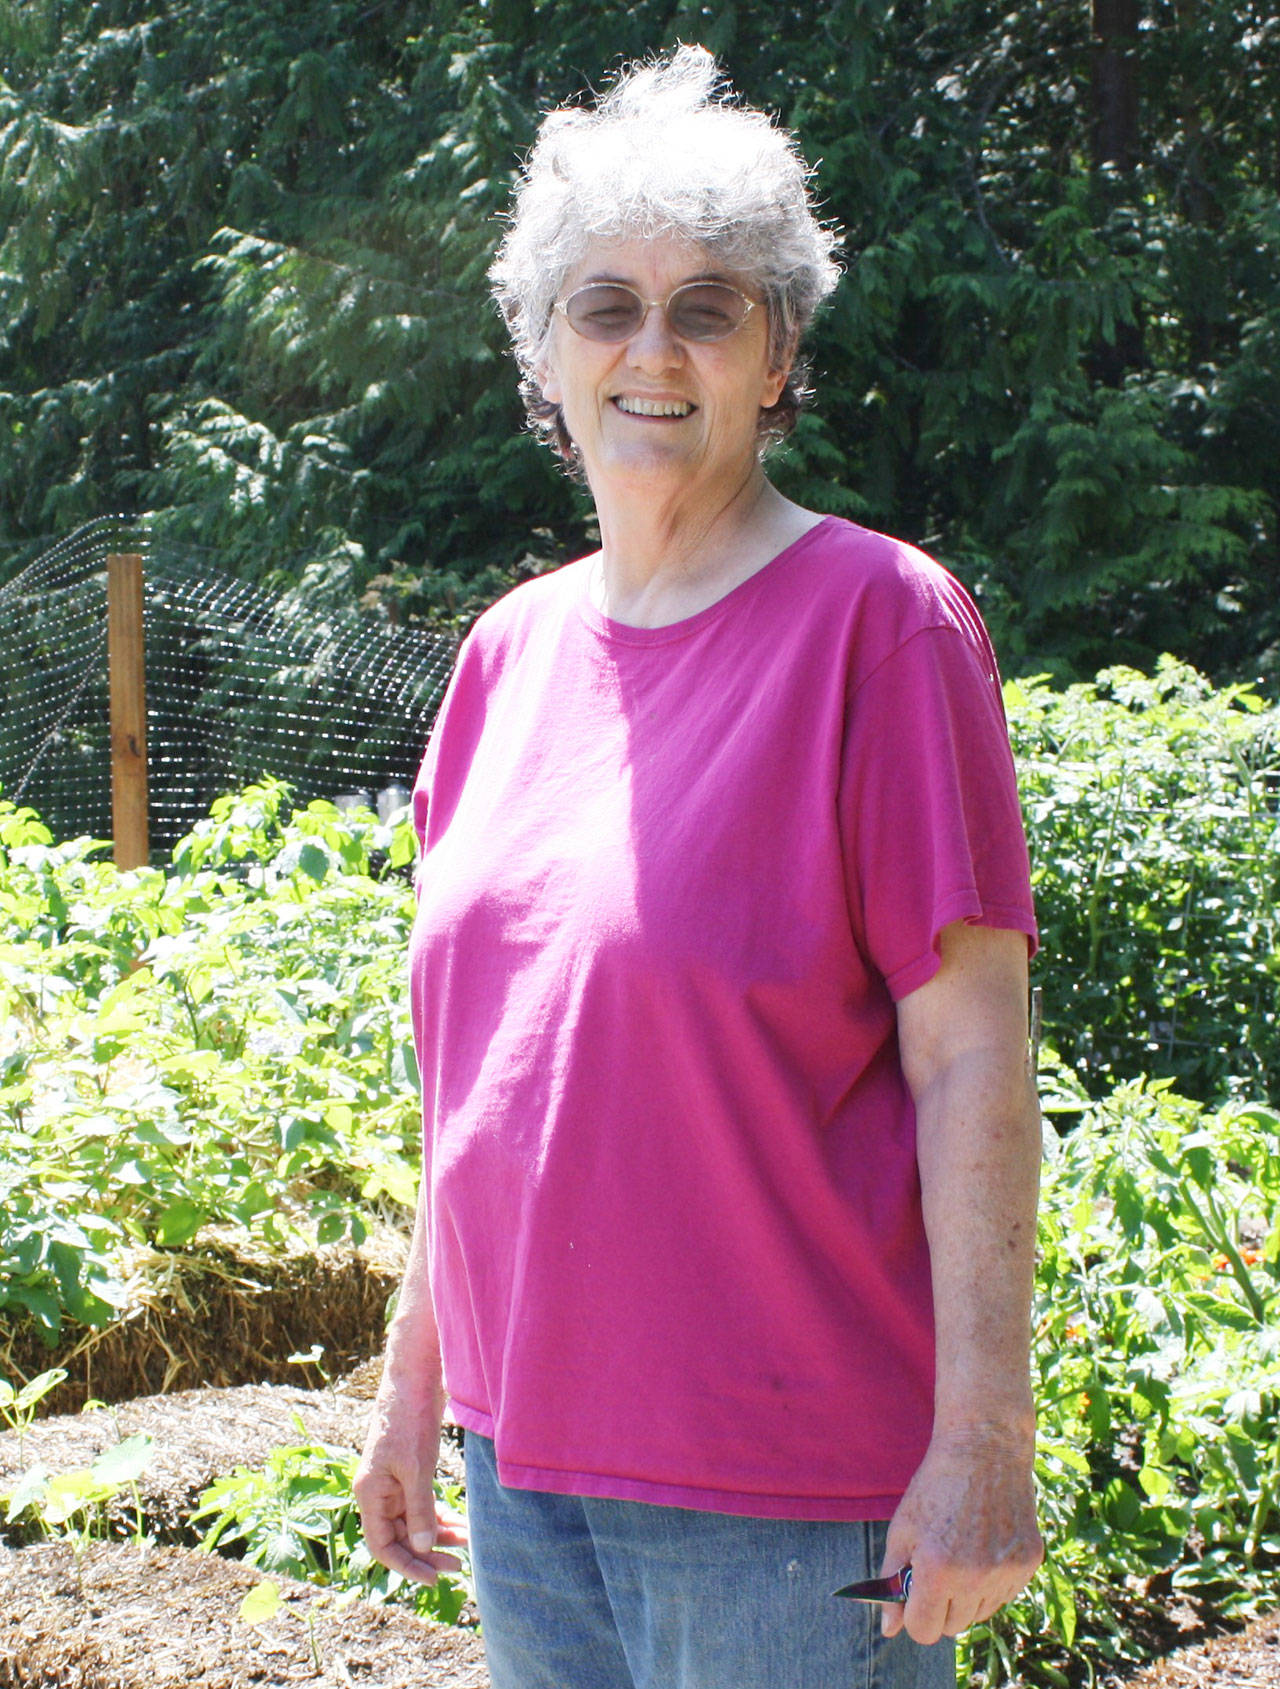 Dr. Muriel Nesbitt, who taught biology for 35 years at the University of California-San Diego, will discuss the utility and sustainability of soil amendments during her hour-long Zoom lecture, part of the Green Thumbs Garden Tips education series, on Aug. 26. Submitted photo